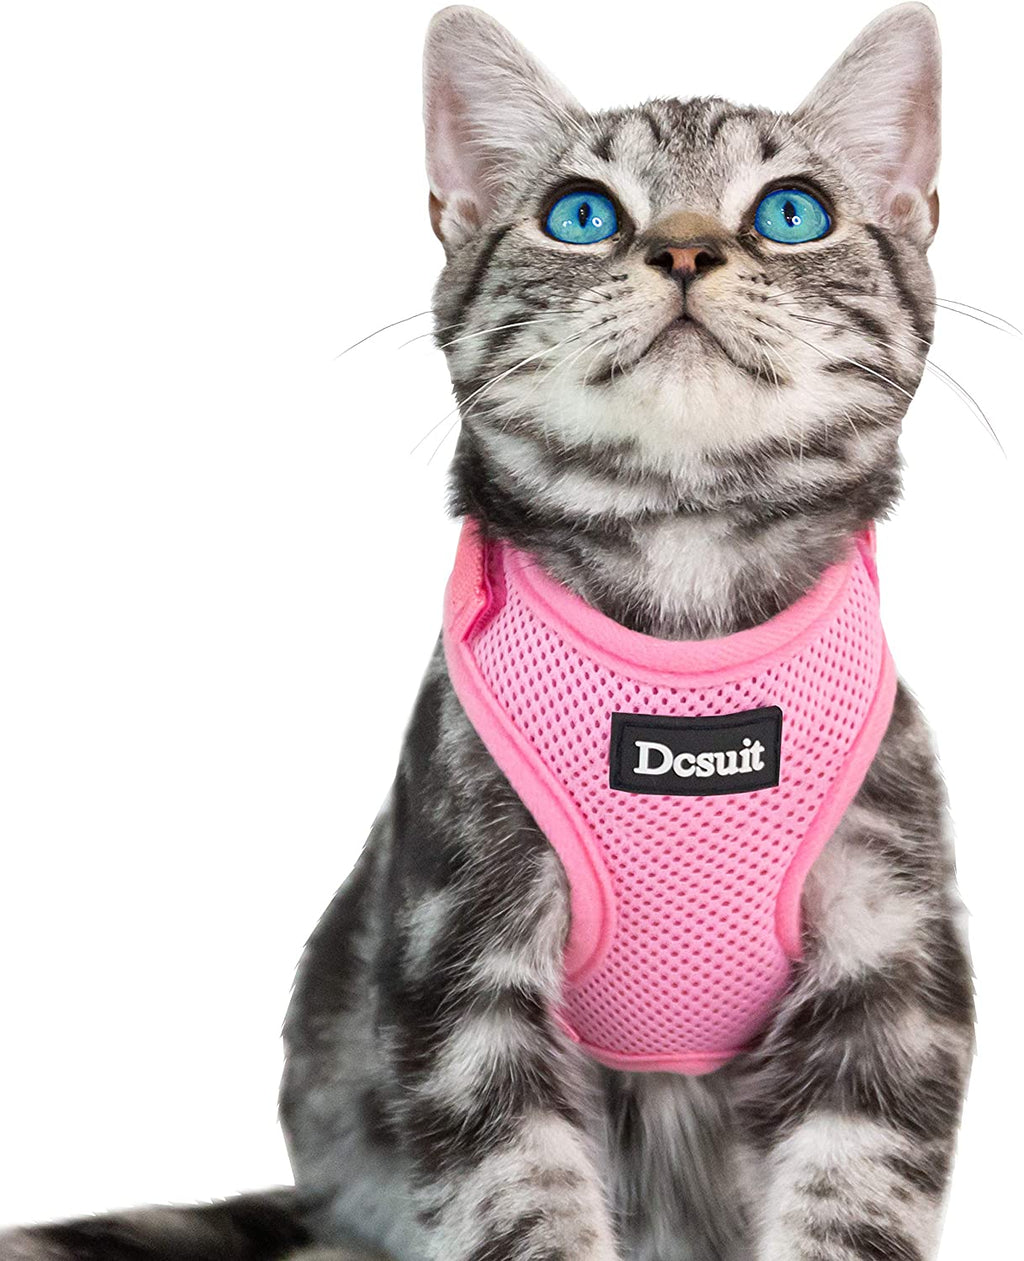  Cat Harness and Leash for Walking Soft Adjustable